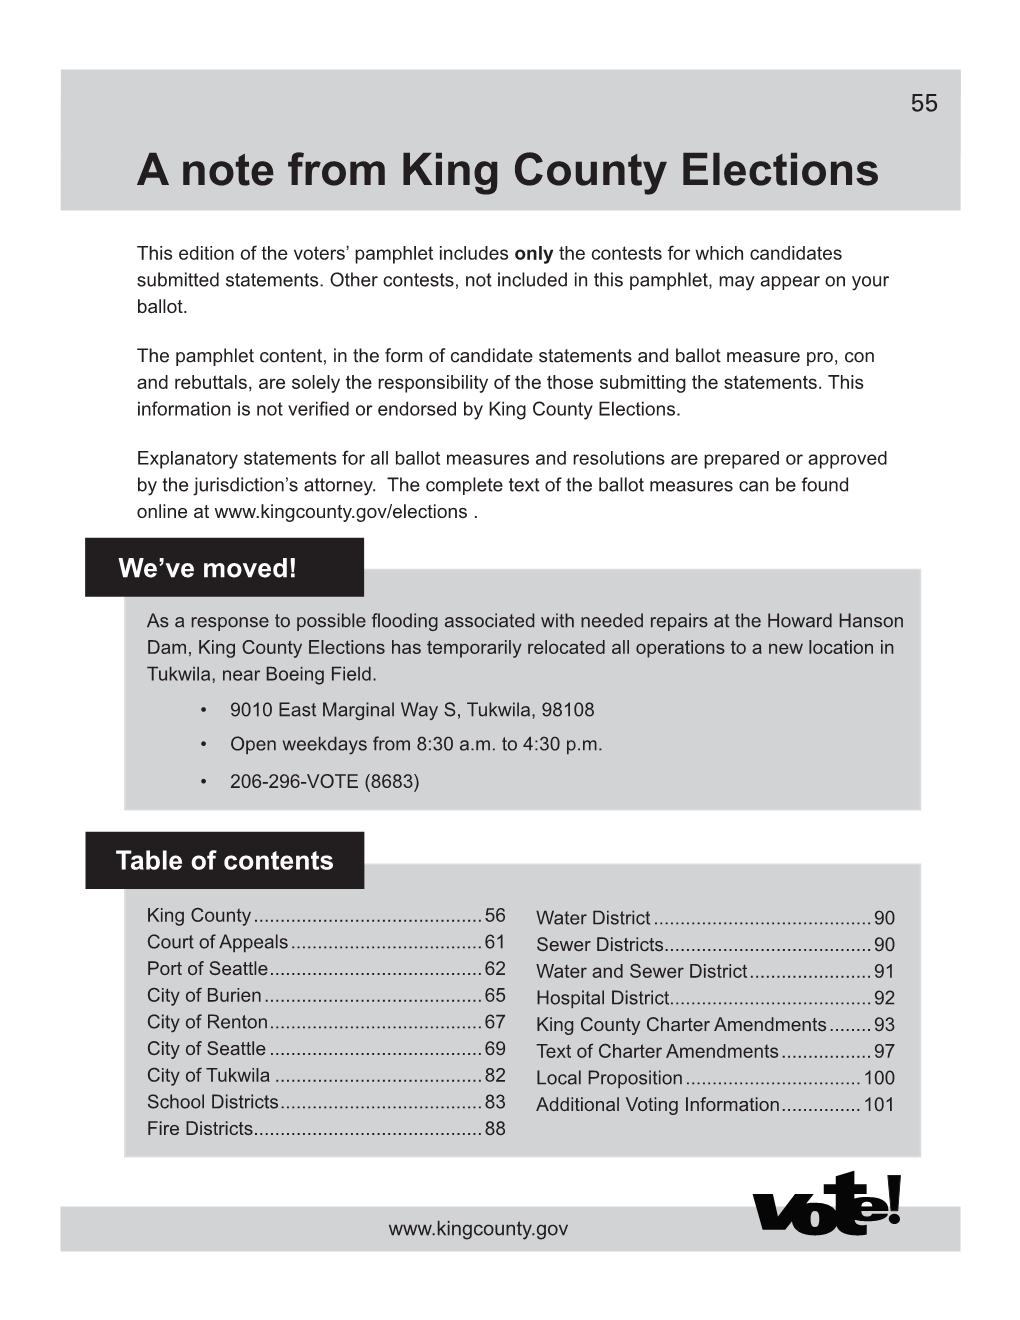 A Note from King County Elections